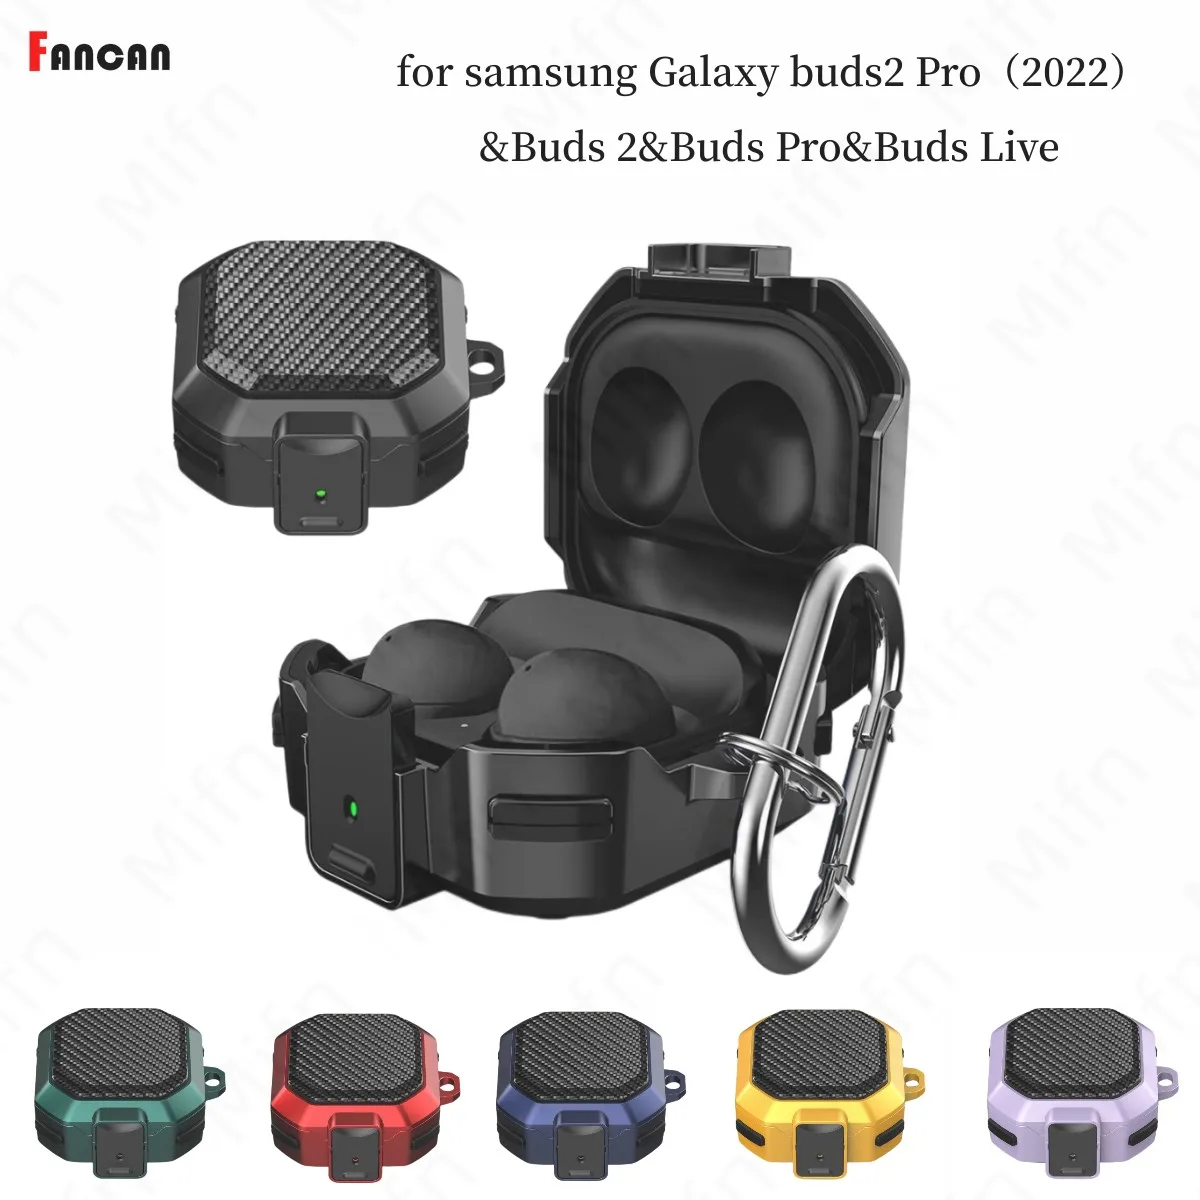 Luxury Cover For Samsung Galaxy Buds Pro Live 2 Case Carbon Fibre Switch Buckle Armor Cover For Galaxy Buds 2 Live Pro Earpods